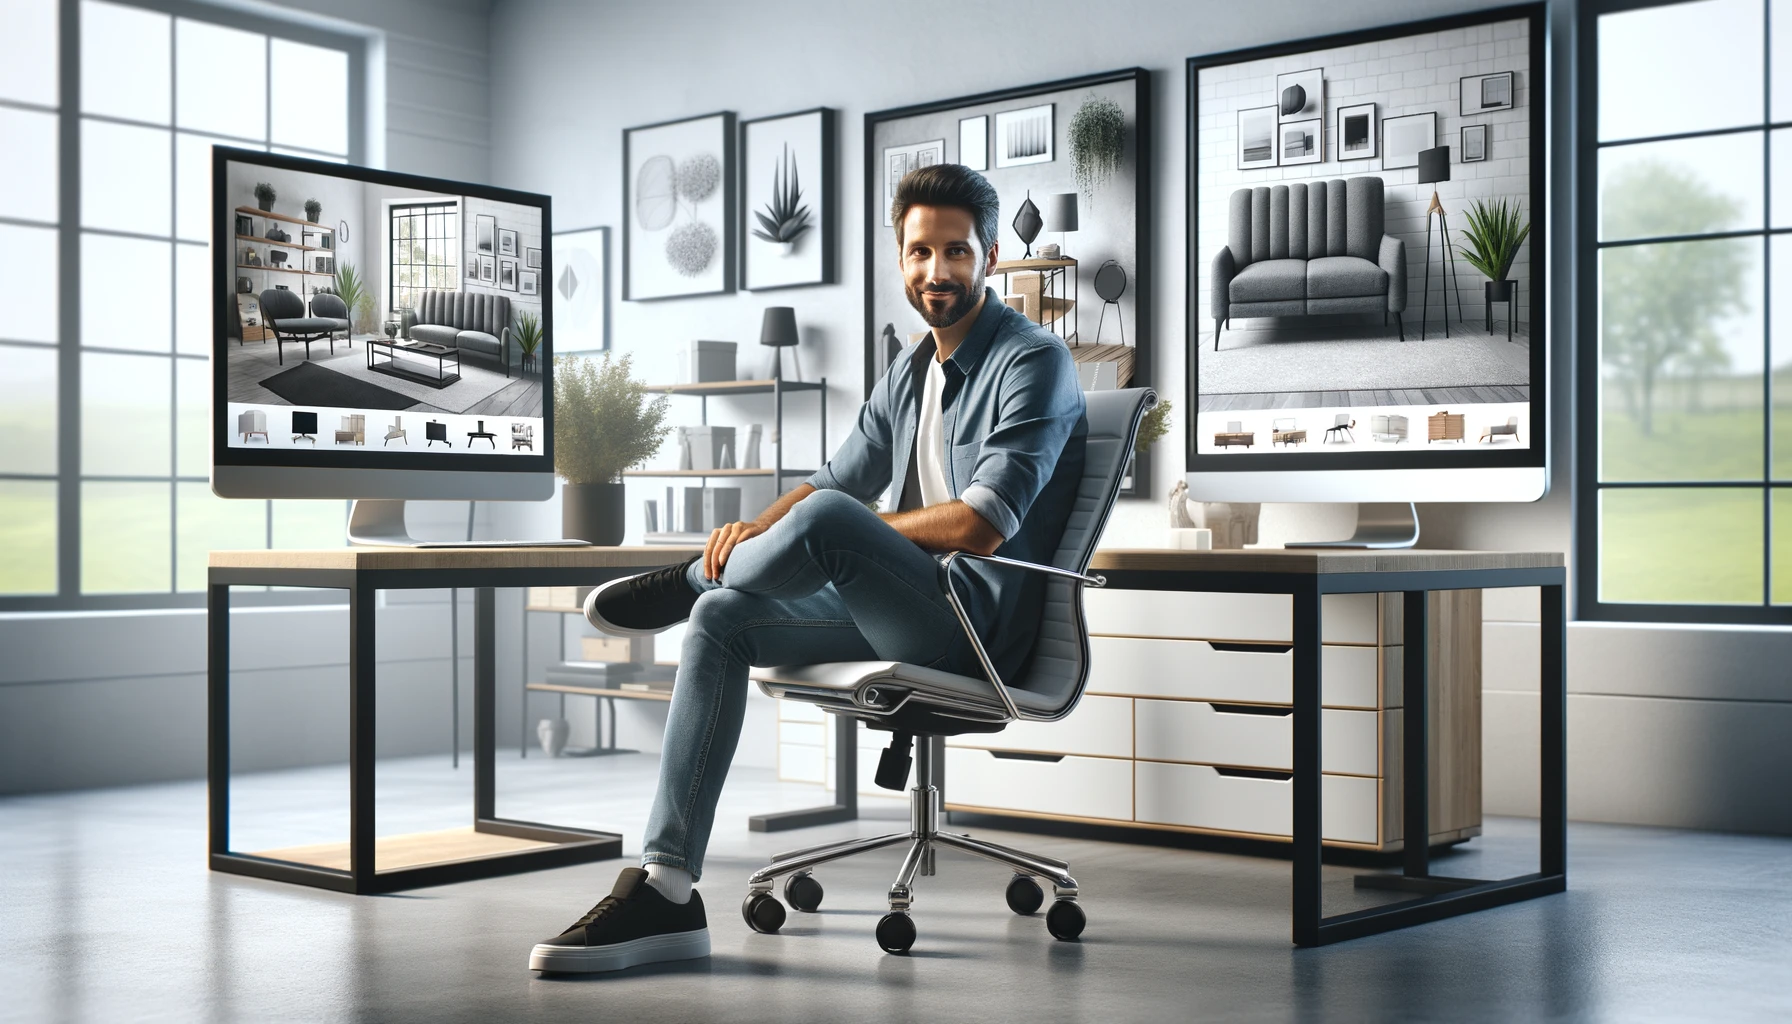 A man sitting at a modern, sleek home office, surrounded by virtual screens displaying various stylish furniture items. He looks content and focused, managing his online furniture store. The environment is a bright, spacious room with minimalist decor. The style is photorealistic, capturing the essence of a digital entrepreneur. The image emulates a photo taken with a Canon EOS 5D Mark IV camera using a Canon EF 24-70mm f/2.8L II USM lens. The settings mimic f/2.8 aperture, and the aspect ratio is 16:9.